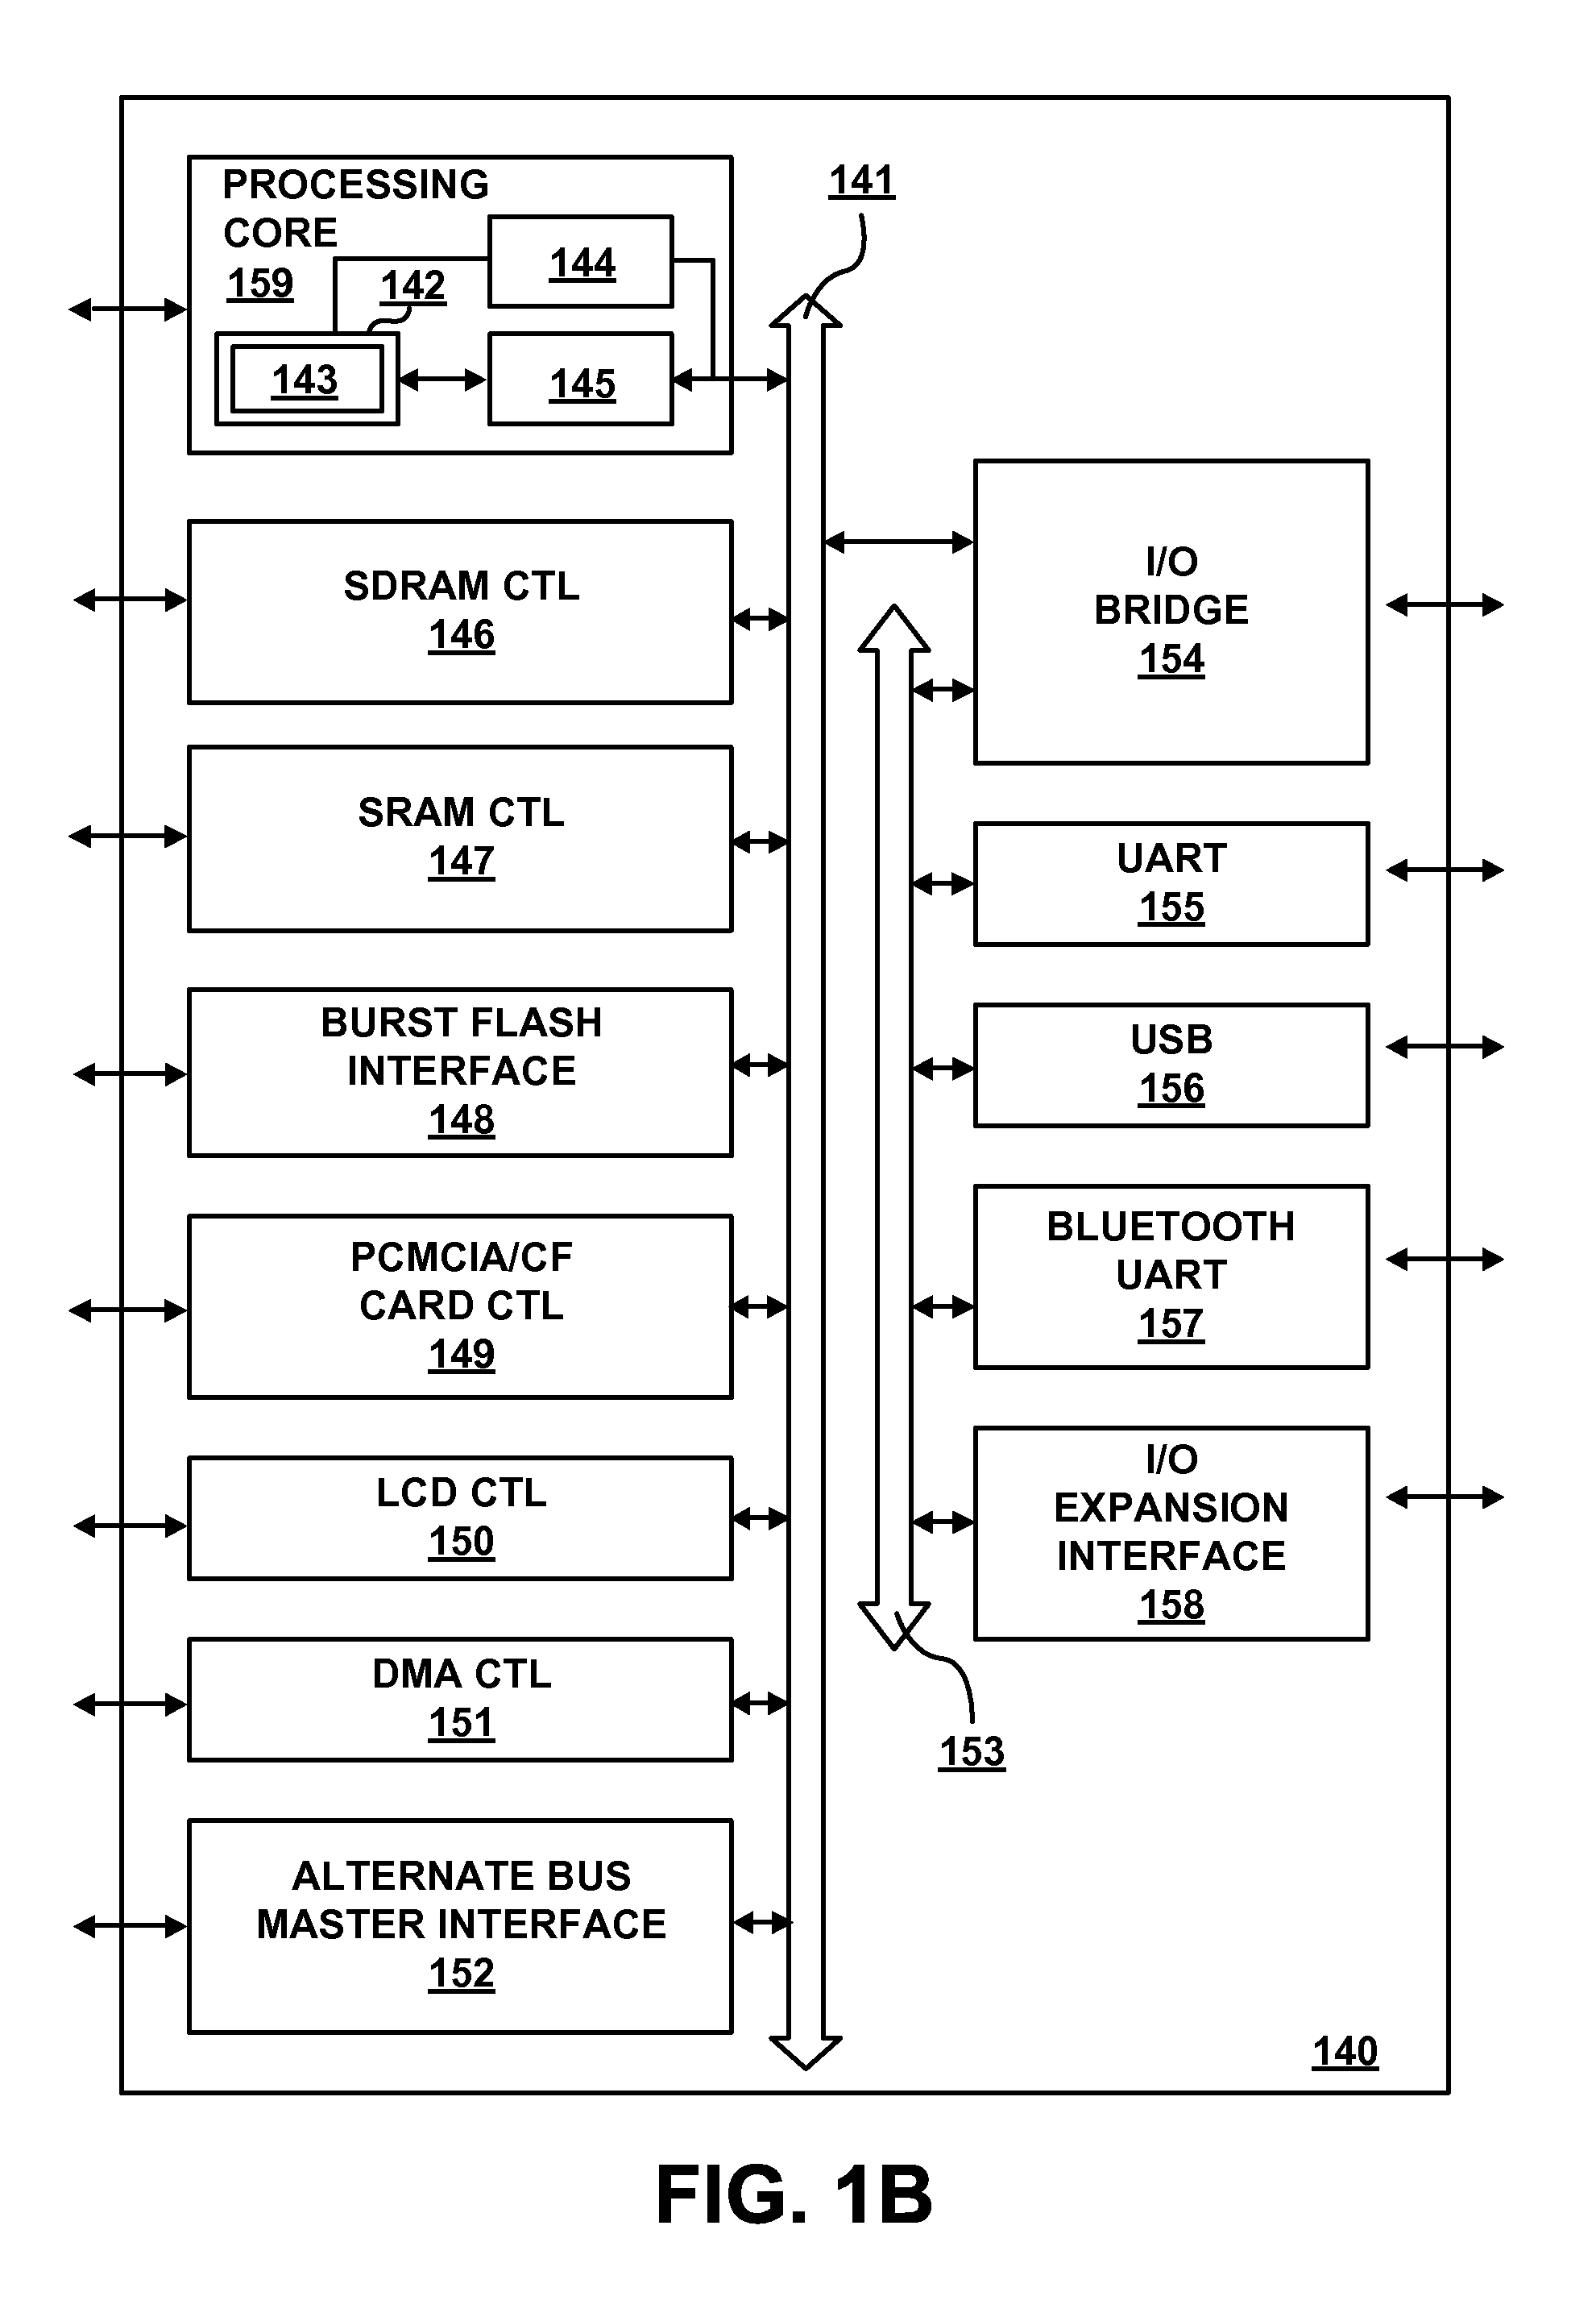 System of improved loop detection and execution